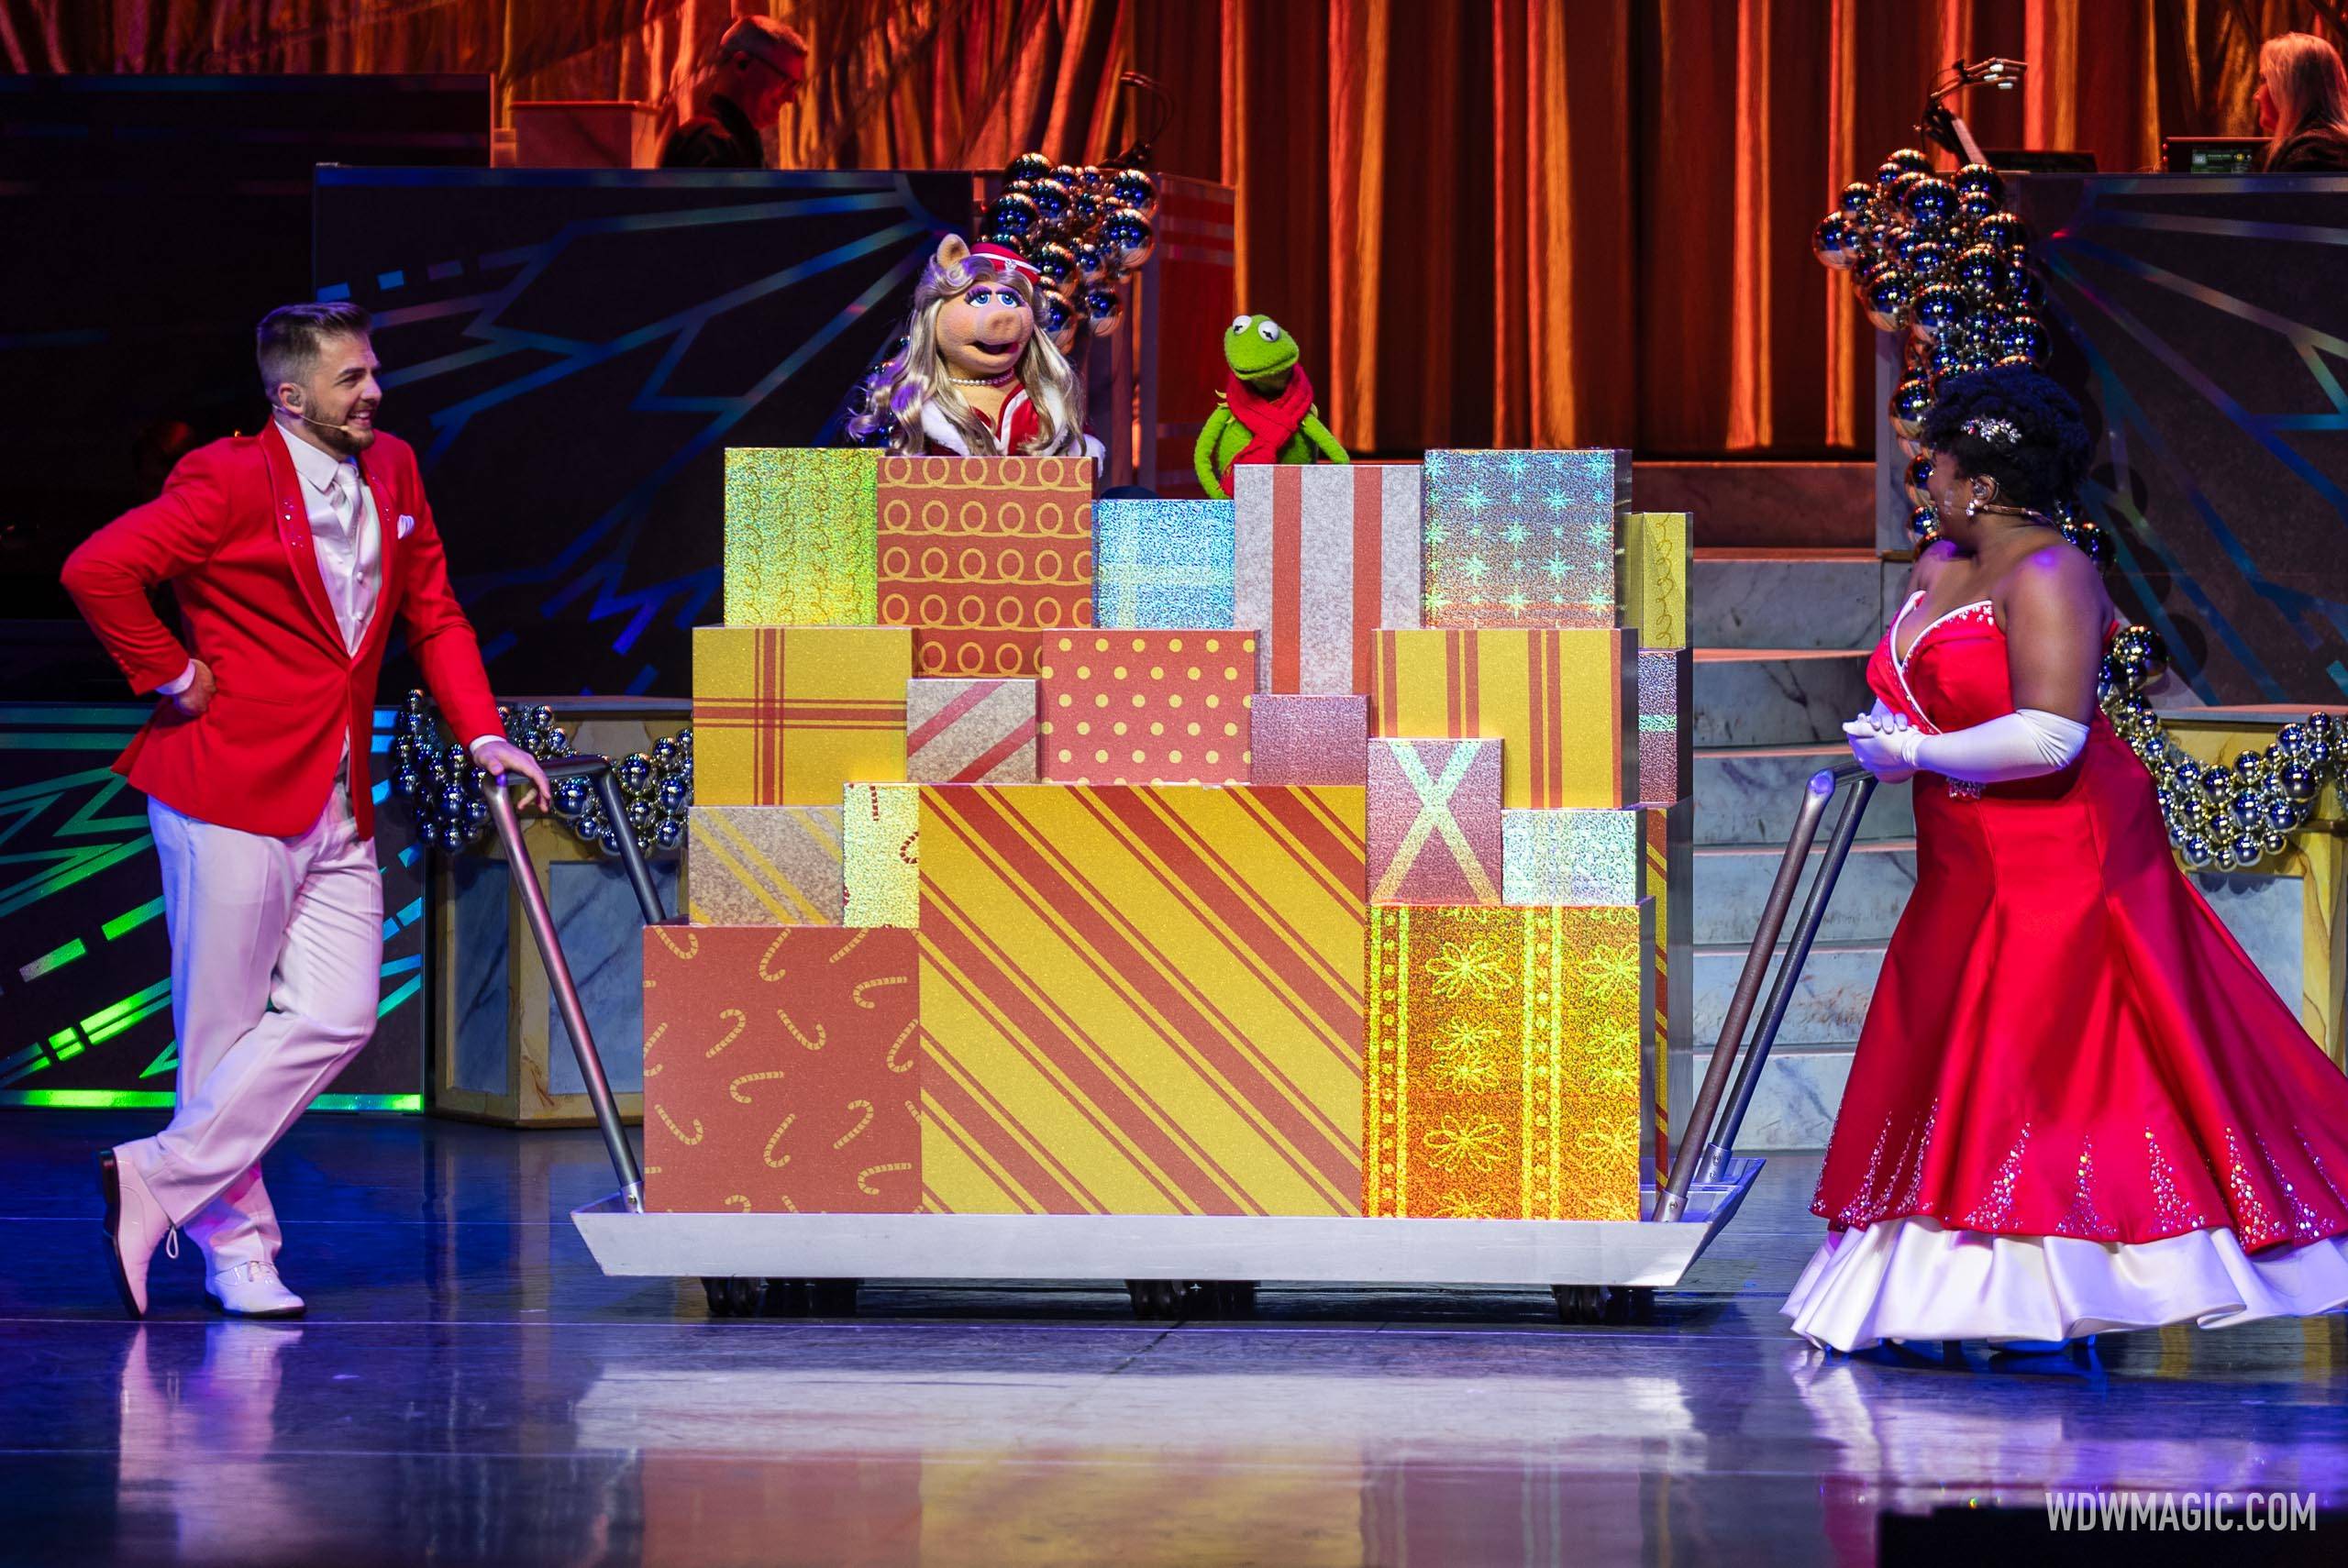 VIDEO - Disney Holidays in Hollywood show with the Muppets from Disney Jollywood Nights